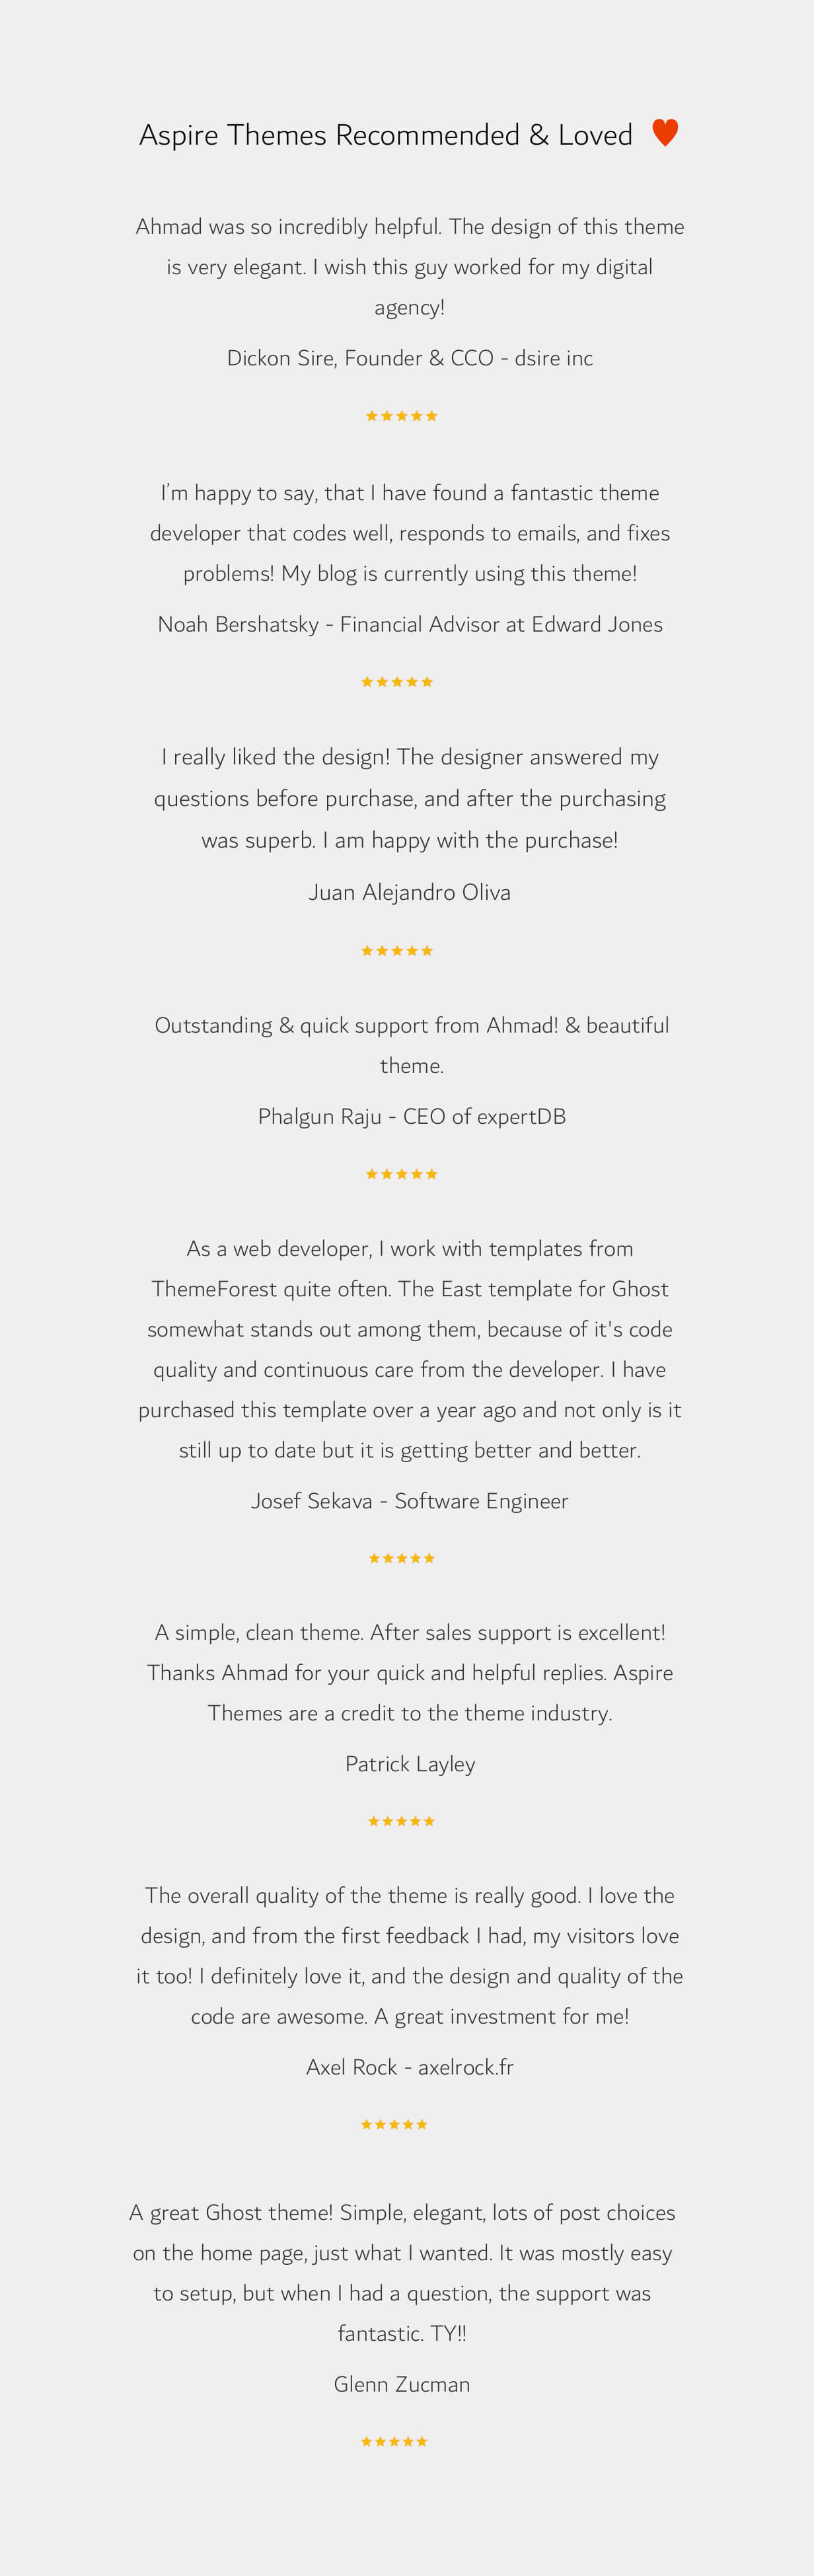 East - Minimal and Clean Jekyll Blog Theme - 5